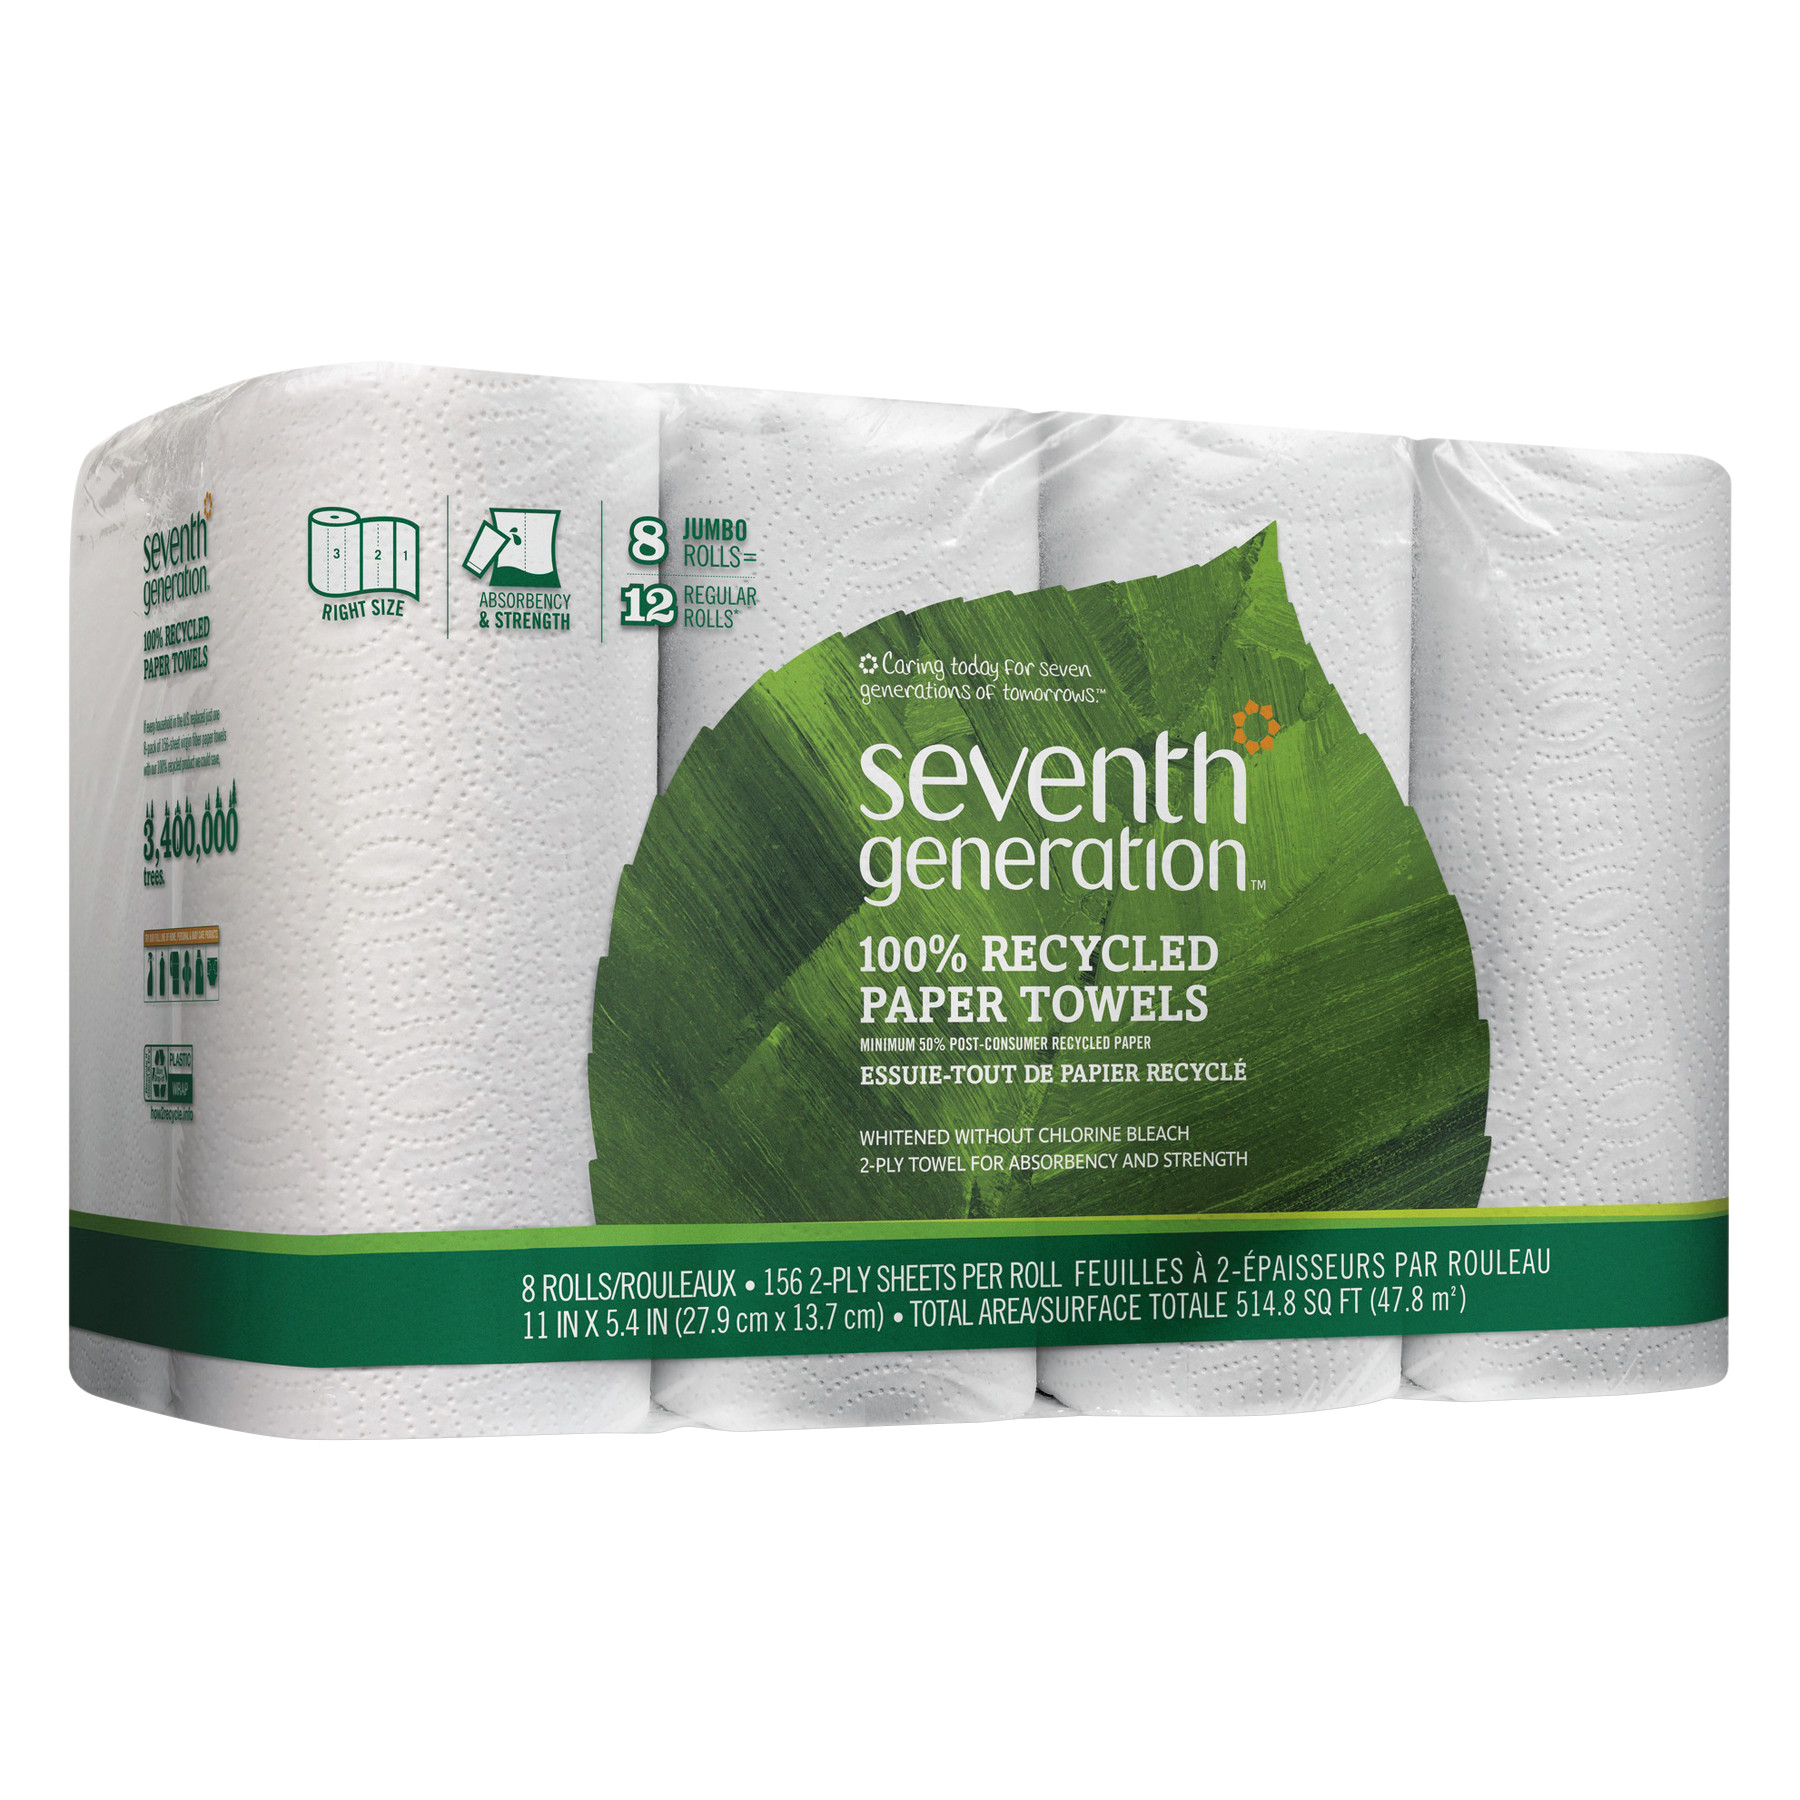 Seventh Generation 100% Recycled Paper Towel Rolls, 2-Ply, 11 x 5.4 Sheets, 156 Sheets/RL, 32RL/CT - image 2 of 2